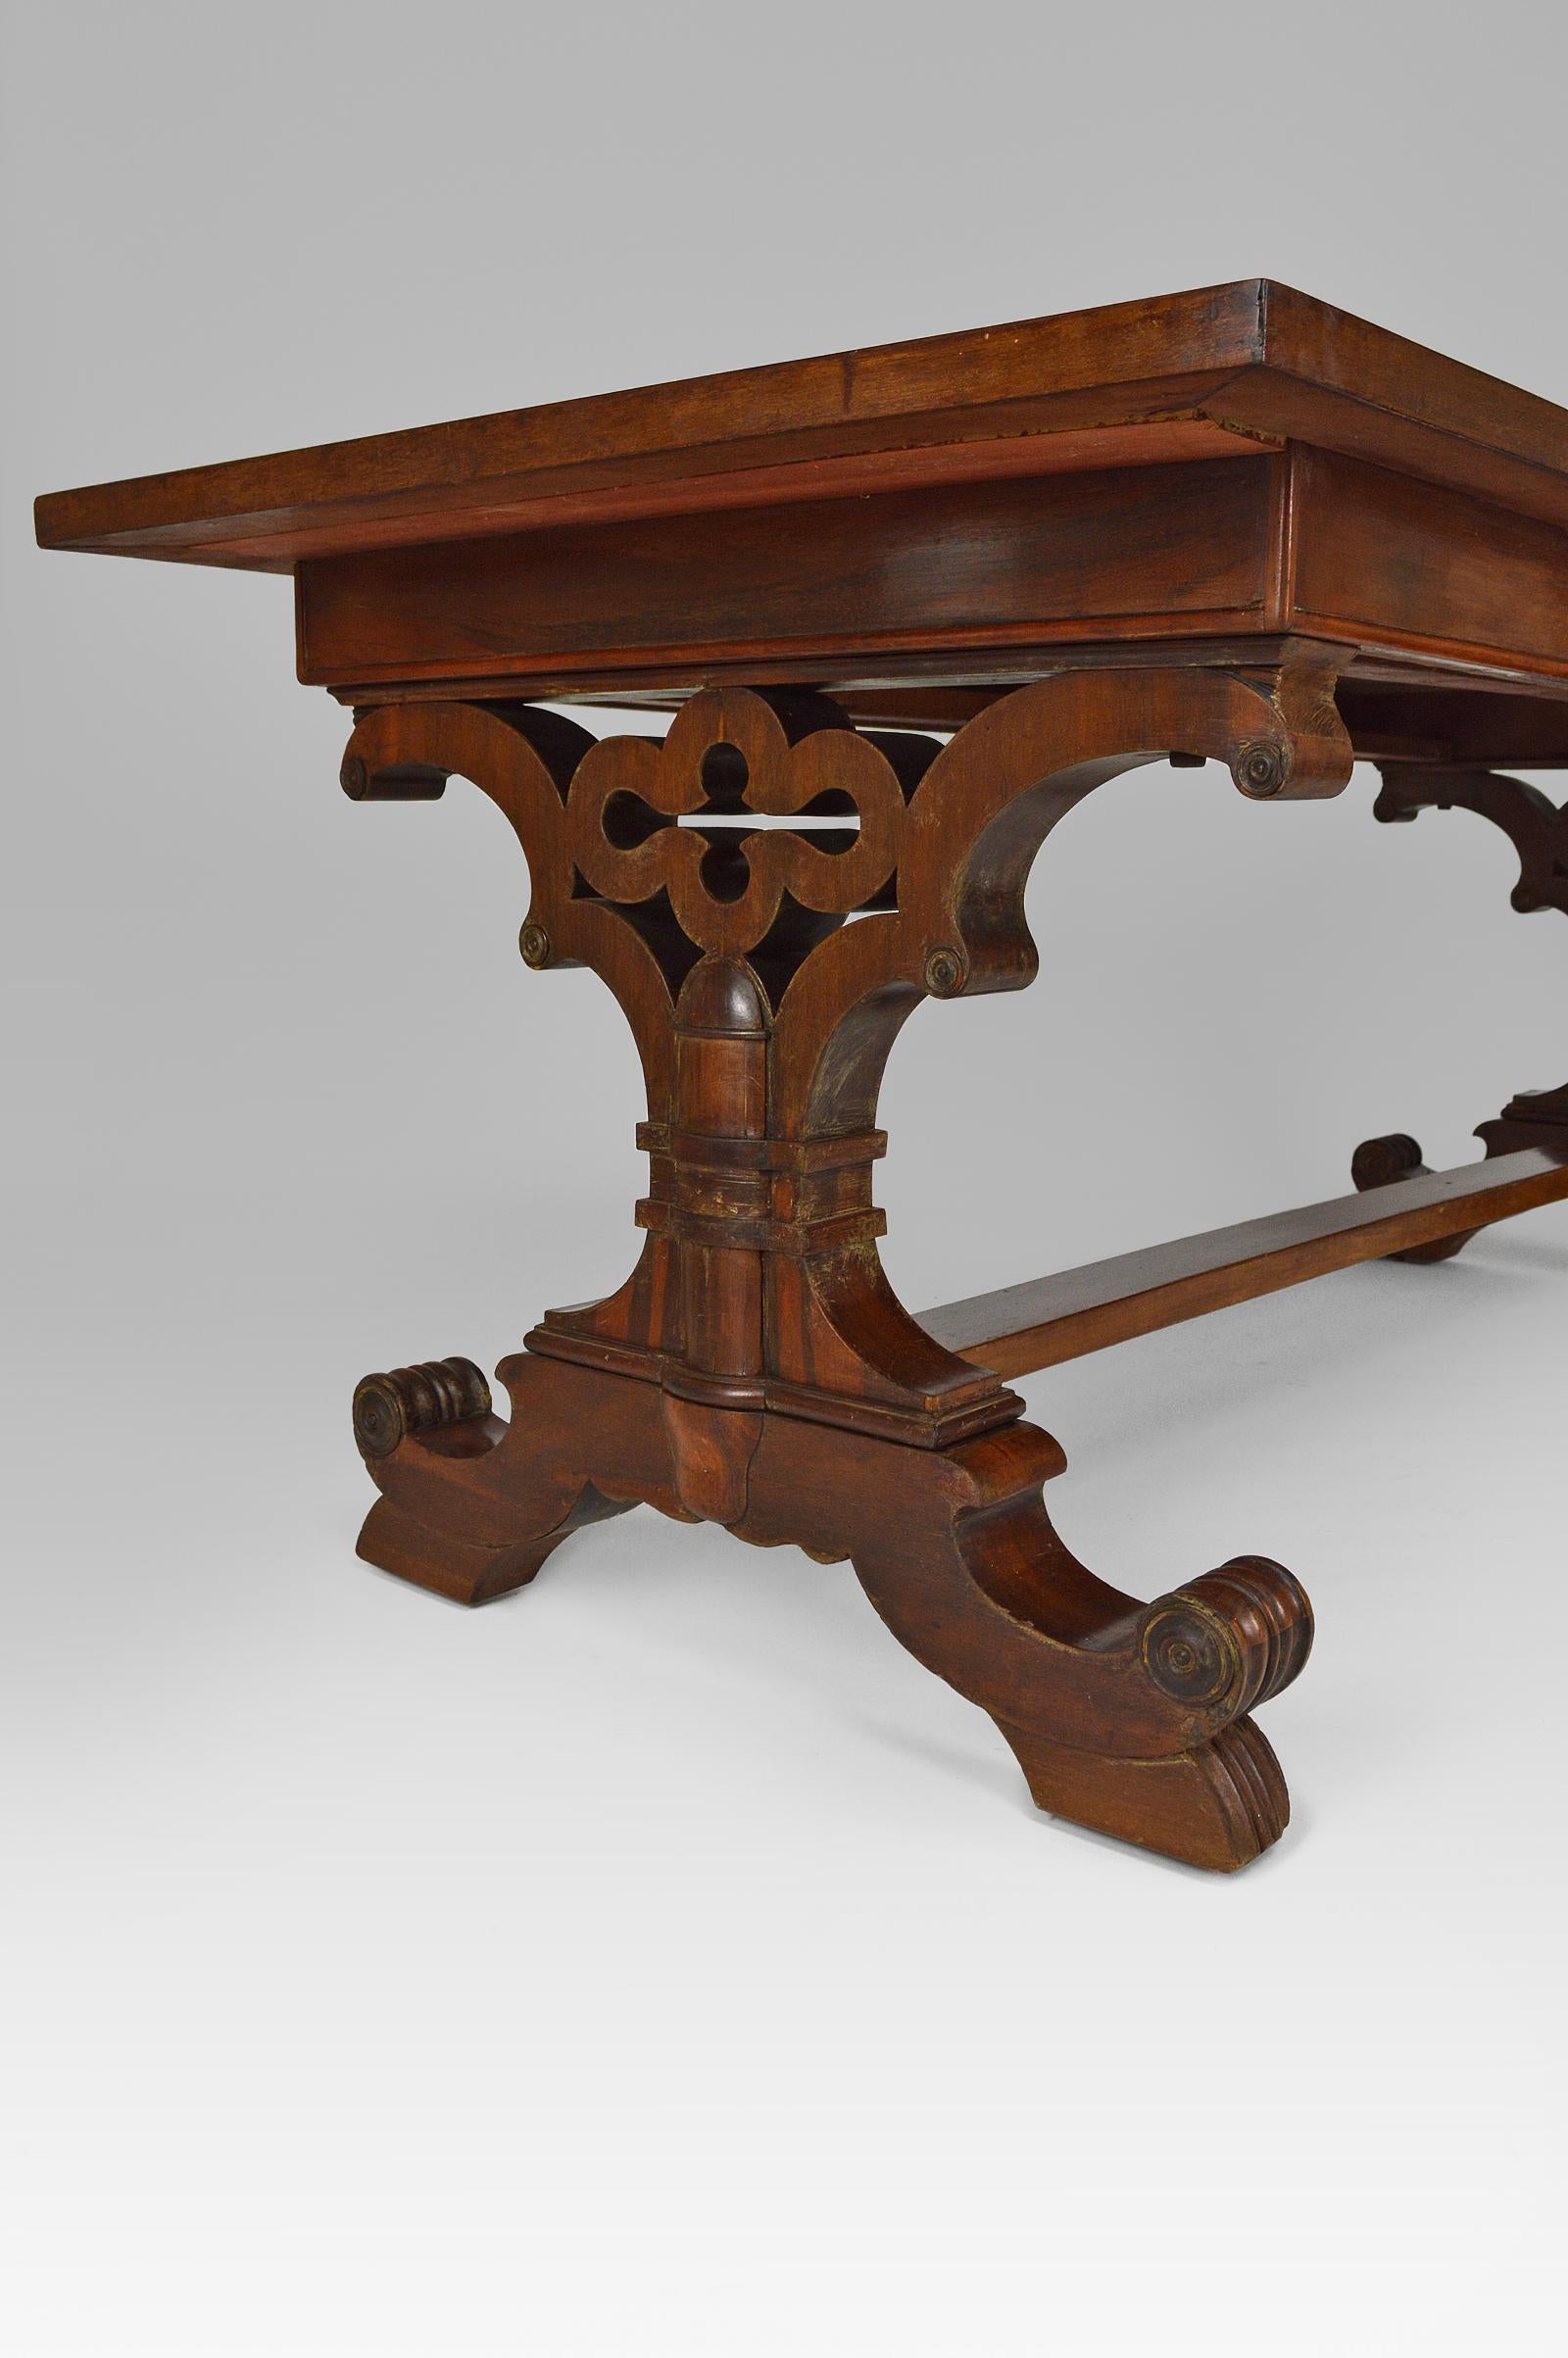 Wood Gothic Revival Dining Table in Mahogany, Victorian Era, circa 1840 For Sale